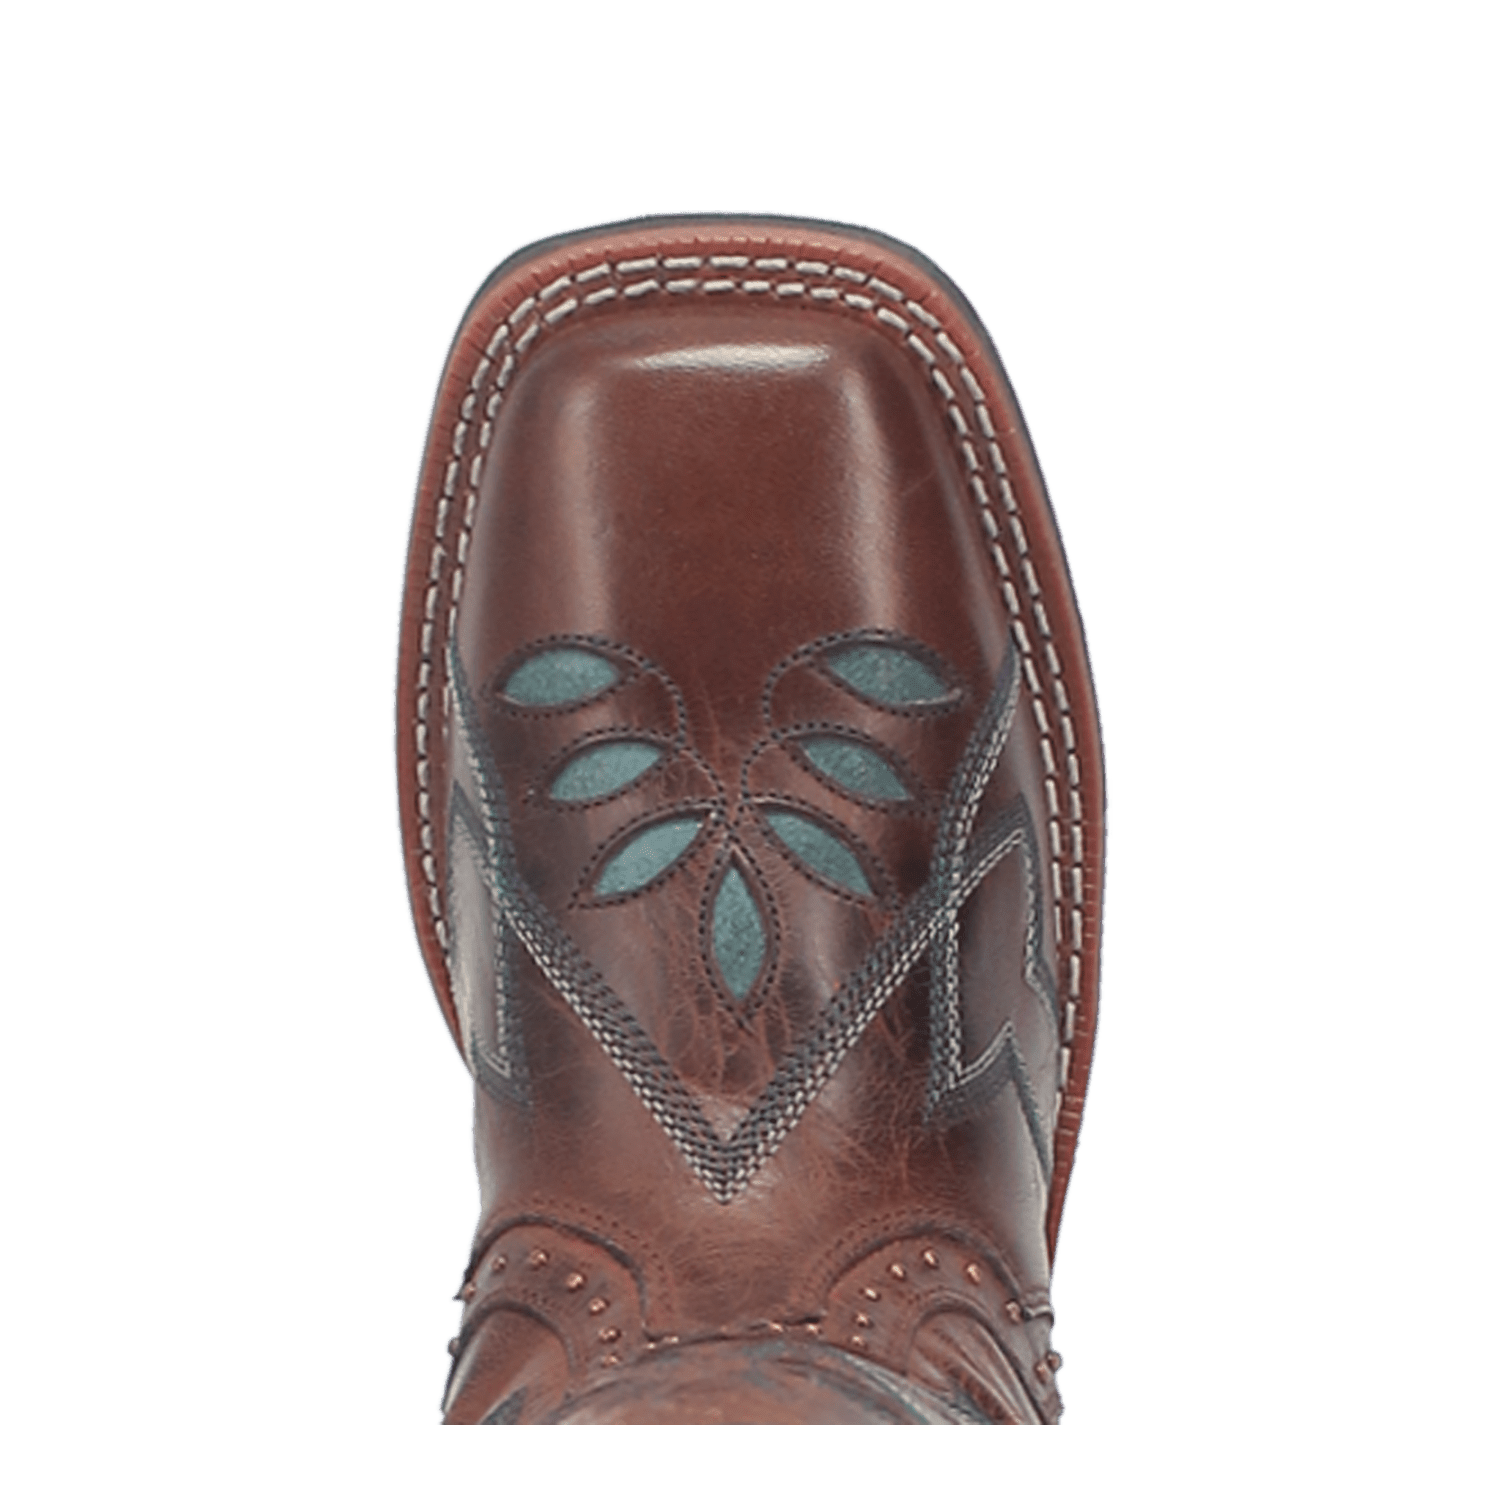 GILLYANN LEATHER BOOT Image